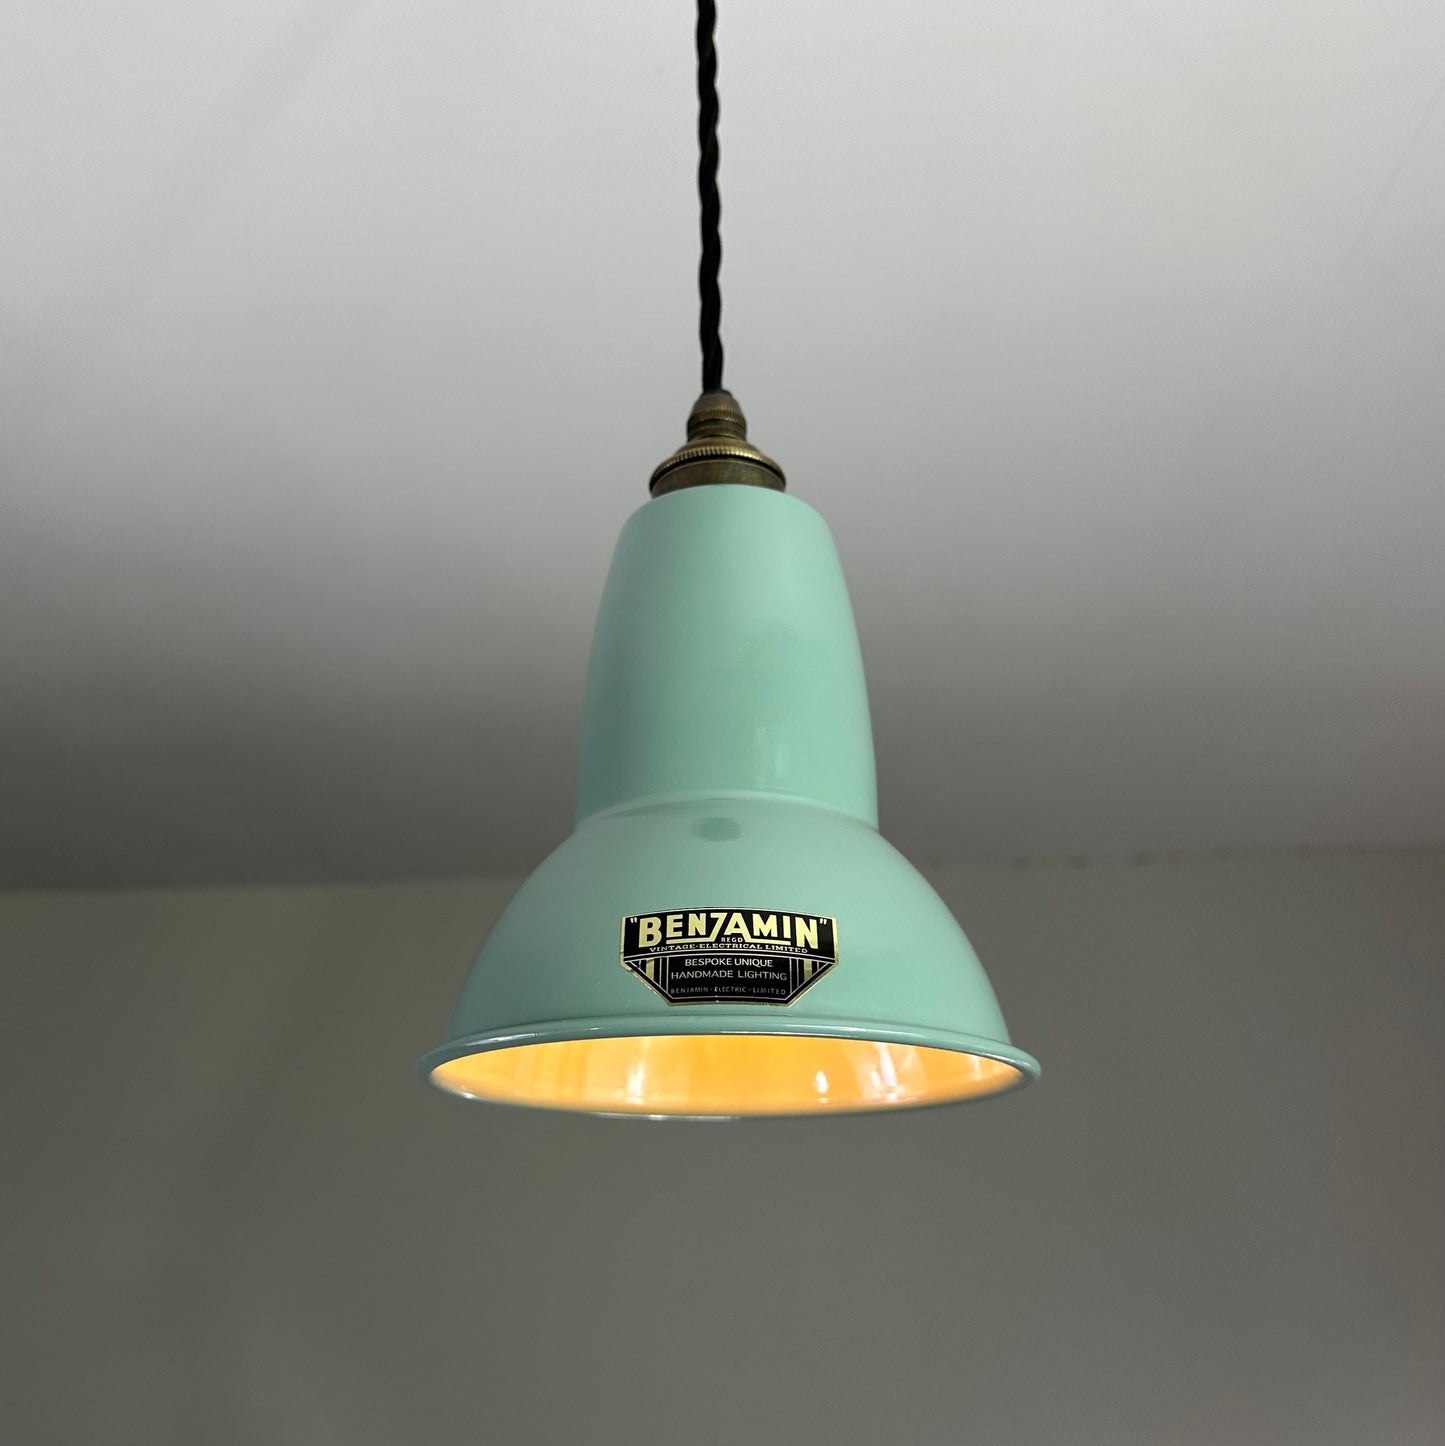 Alby ~ Pistachio Green Shade Pendant Set Light | Ceiling Dining Room | Kitchen Table | Vintage Edison Filament Bulb | 6 Inch